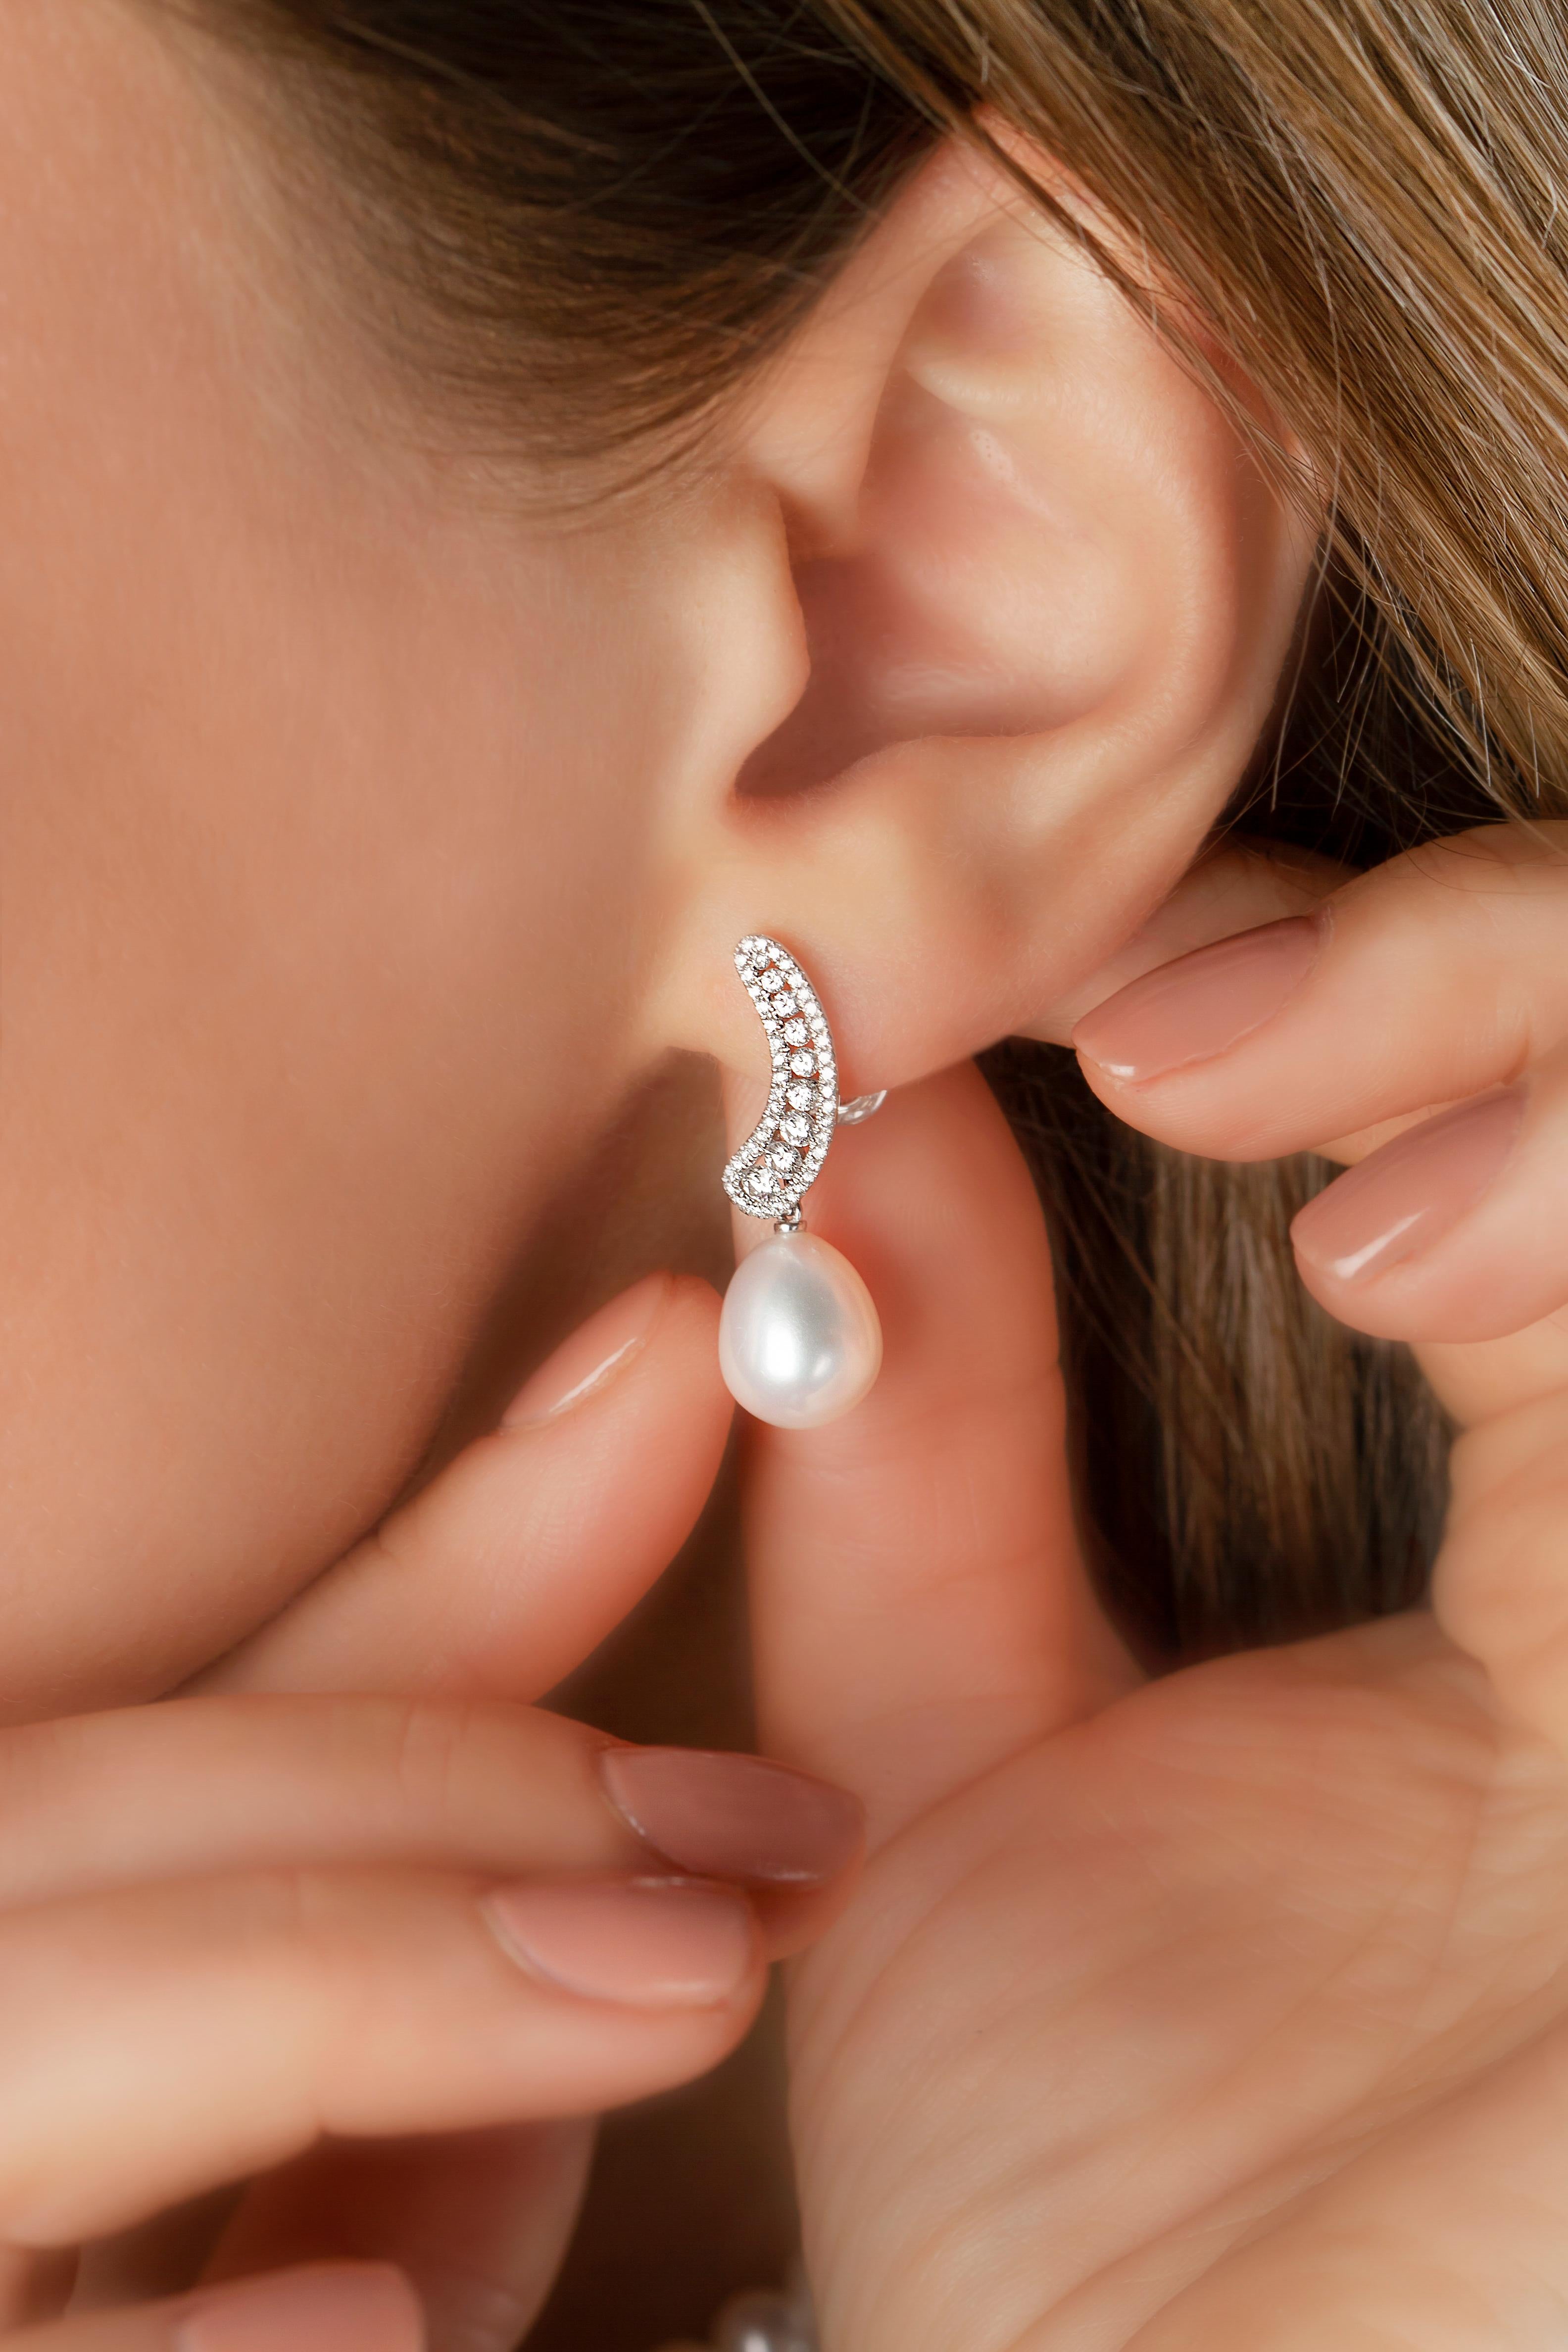 These scintillating earrings by Yoko London feature lustrous drop-shaped pearls beneath a smooth curve of diamonds. These spectacular earrings will add the perfect finishing touch to any outfit and would particularly suit a beaming bride on her